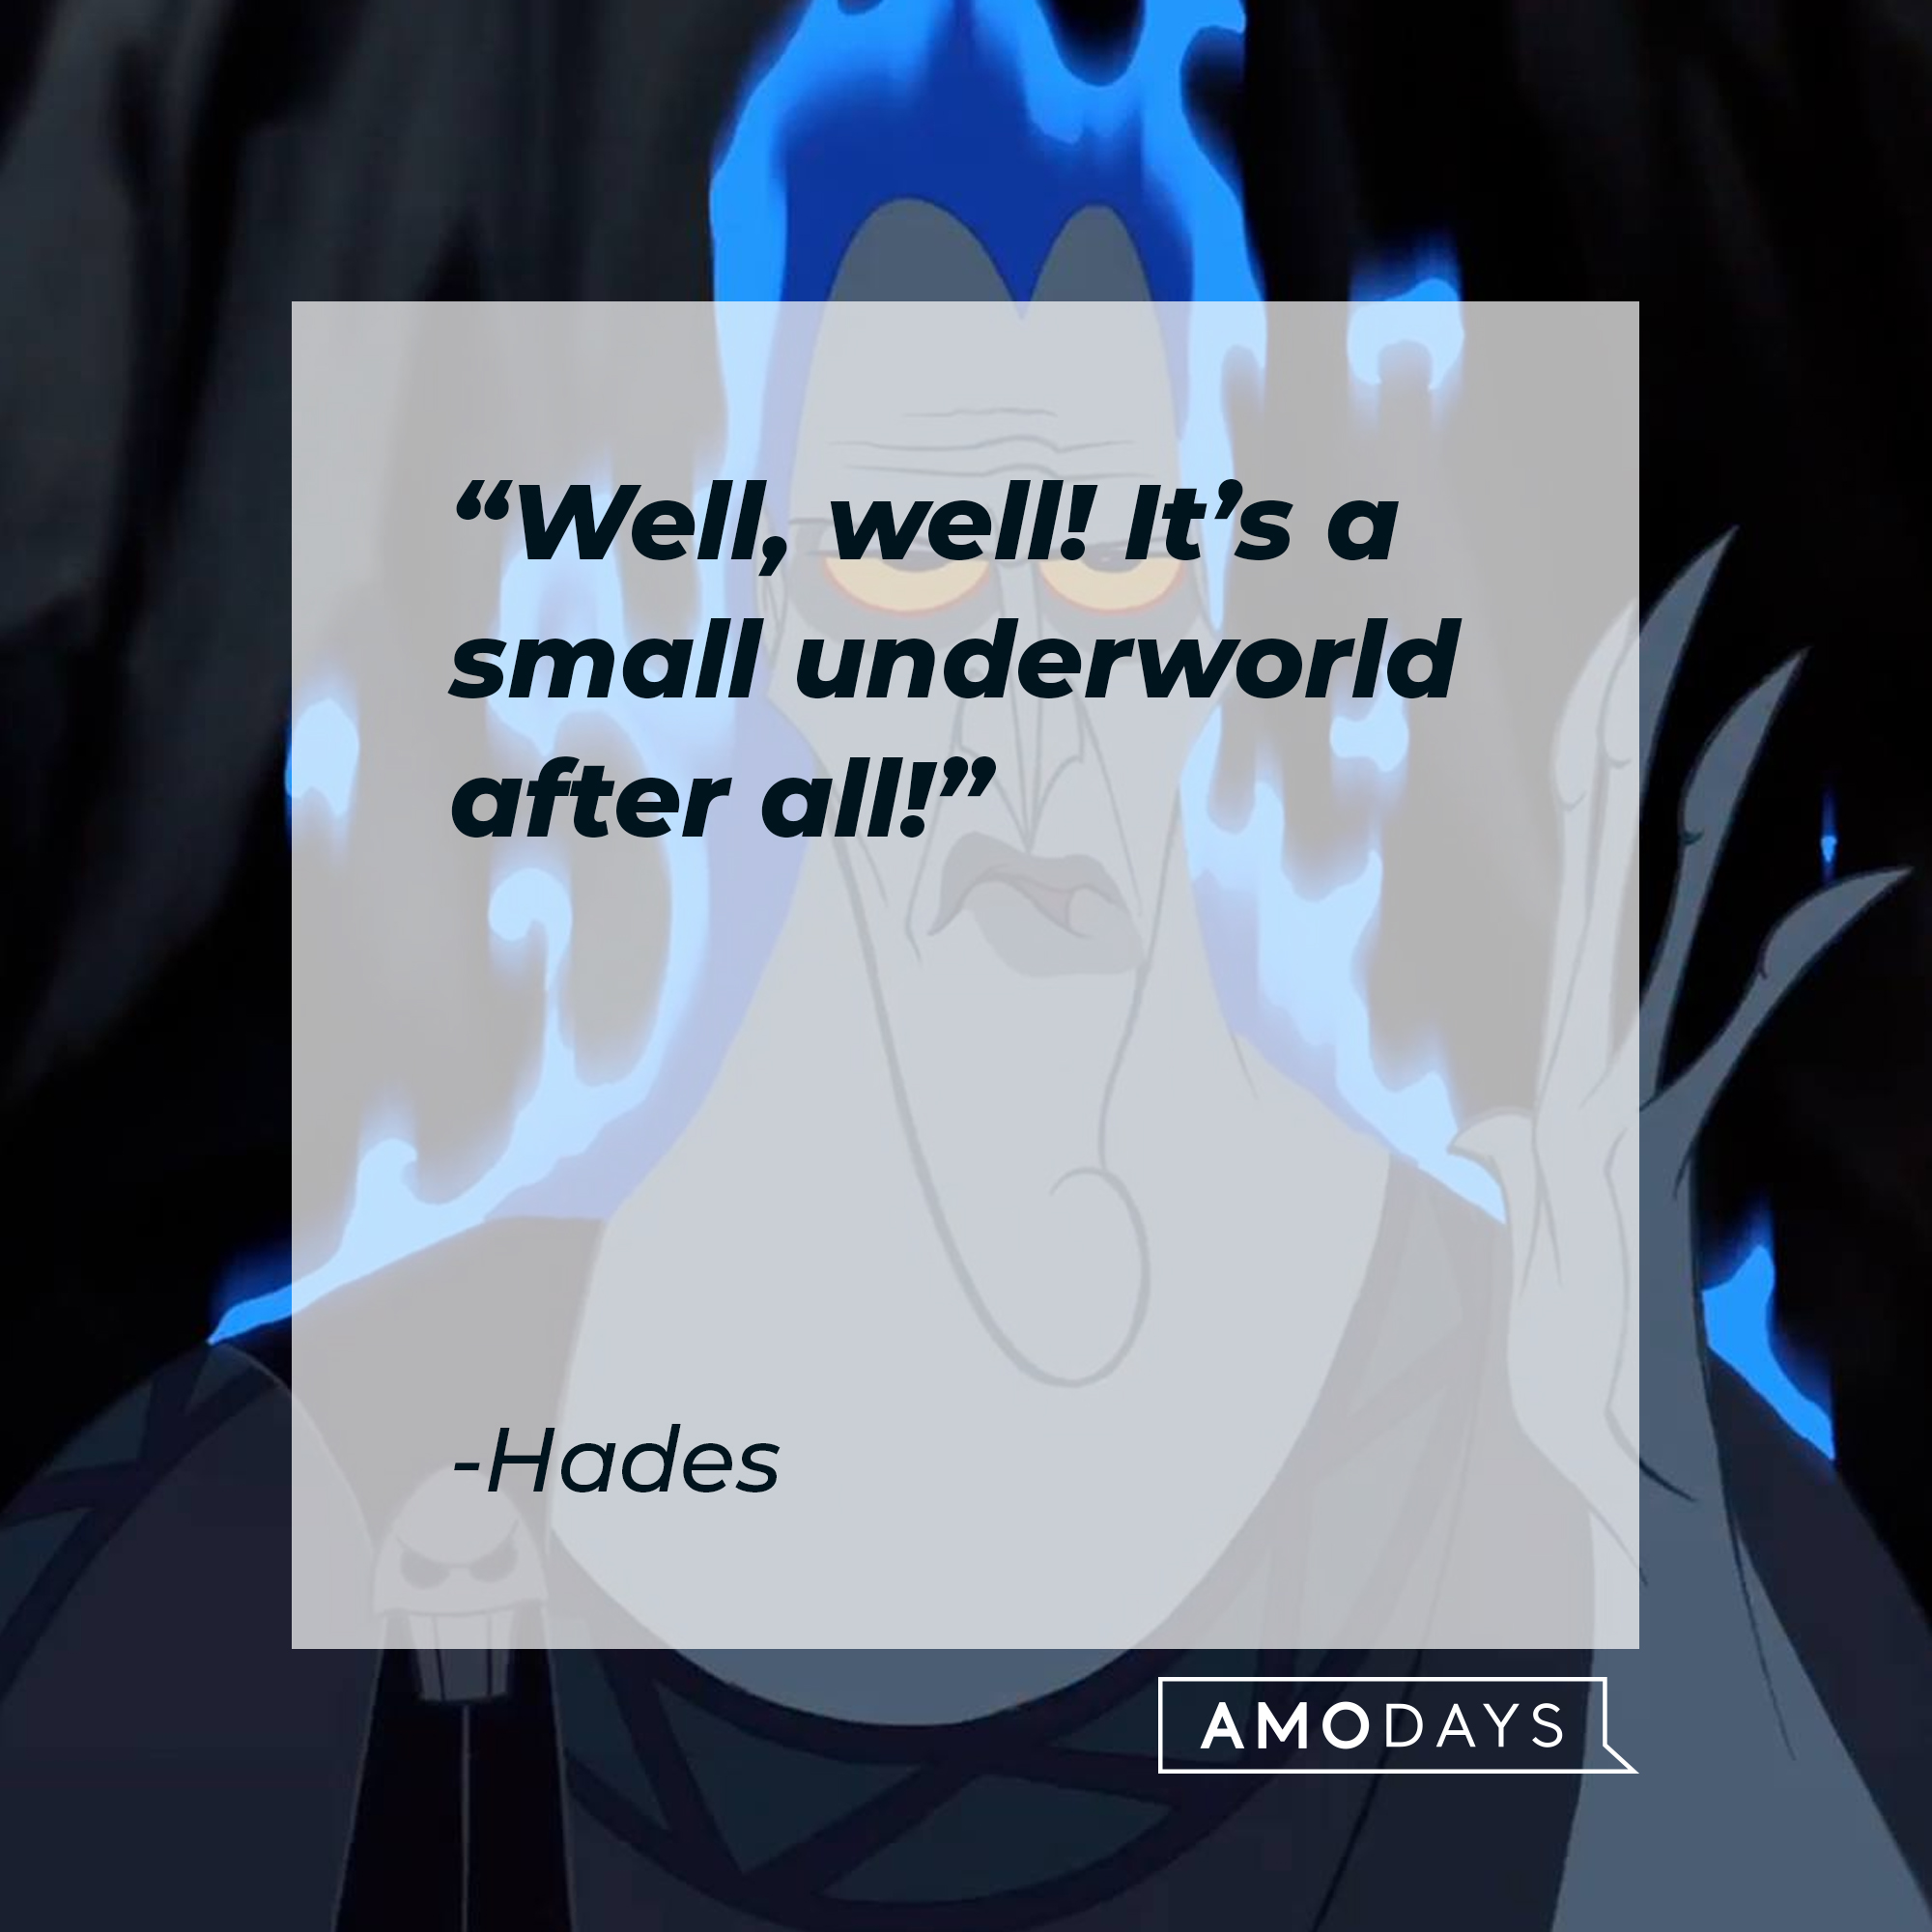 Hades from the "Hercules" movie with his quote: “Well, well! It’s a small underworld after all!” | Source: Facebook.com/DisneyHercules